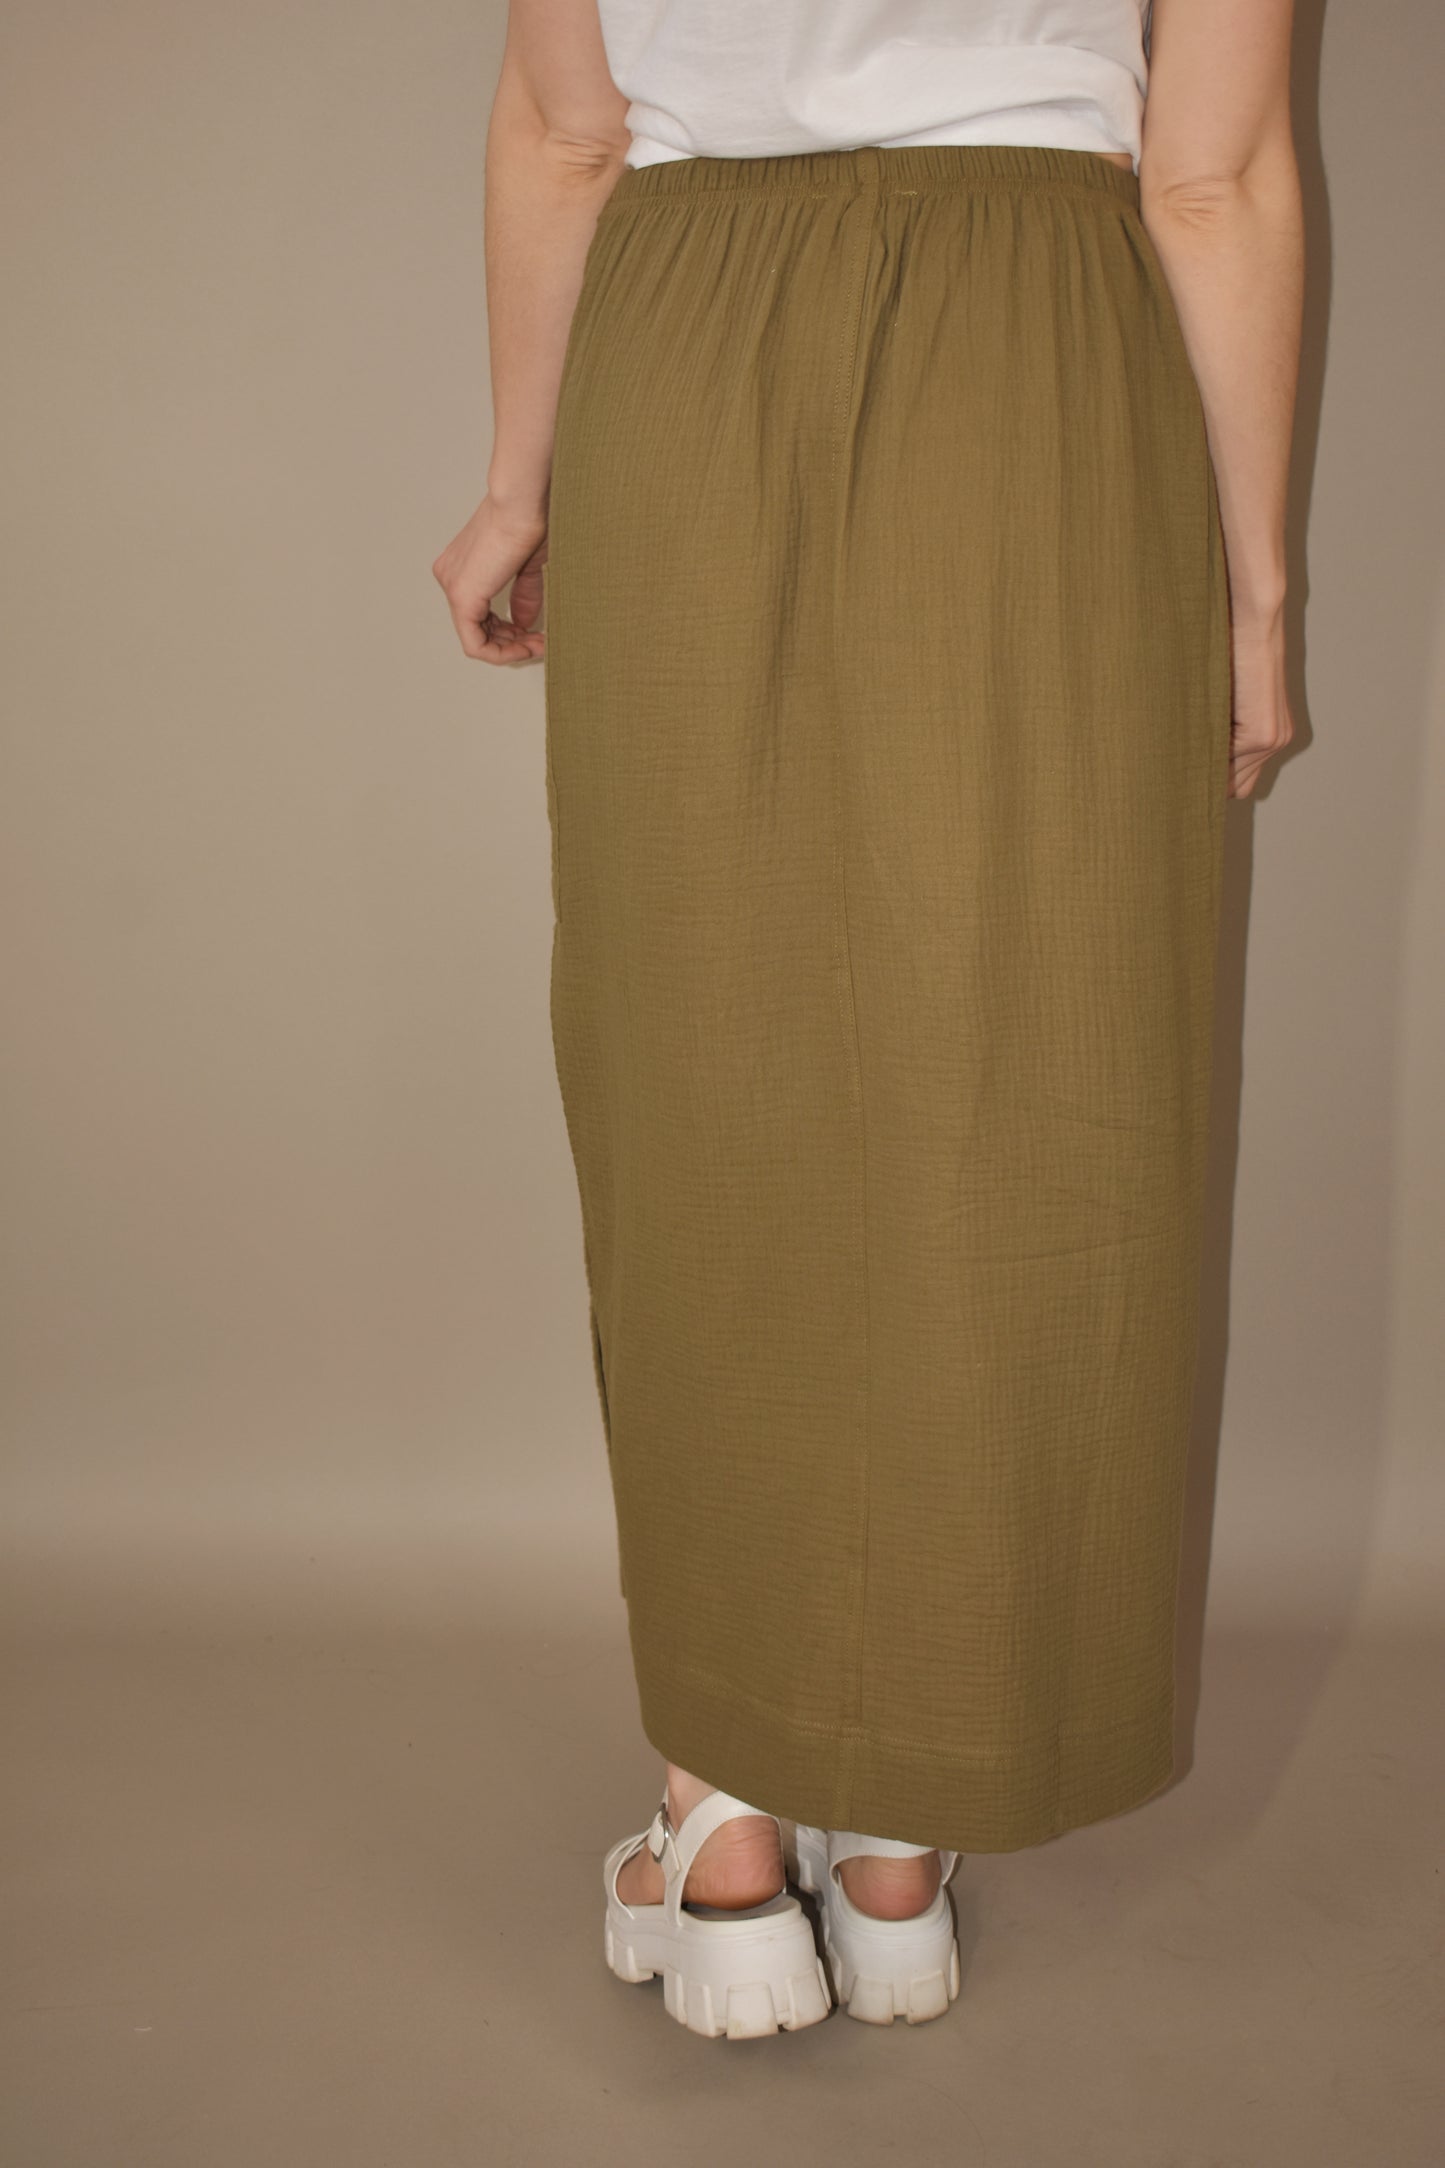 olive double gauze fabric midi skirt. side slit and patch pocket on the same side as the slit. seam down the front. drawstring waist. super soft.